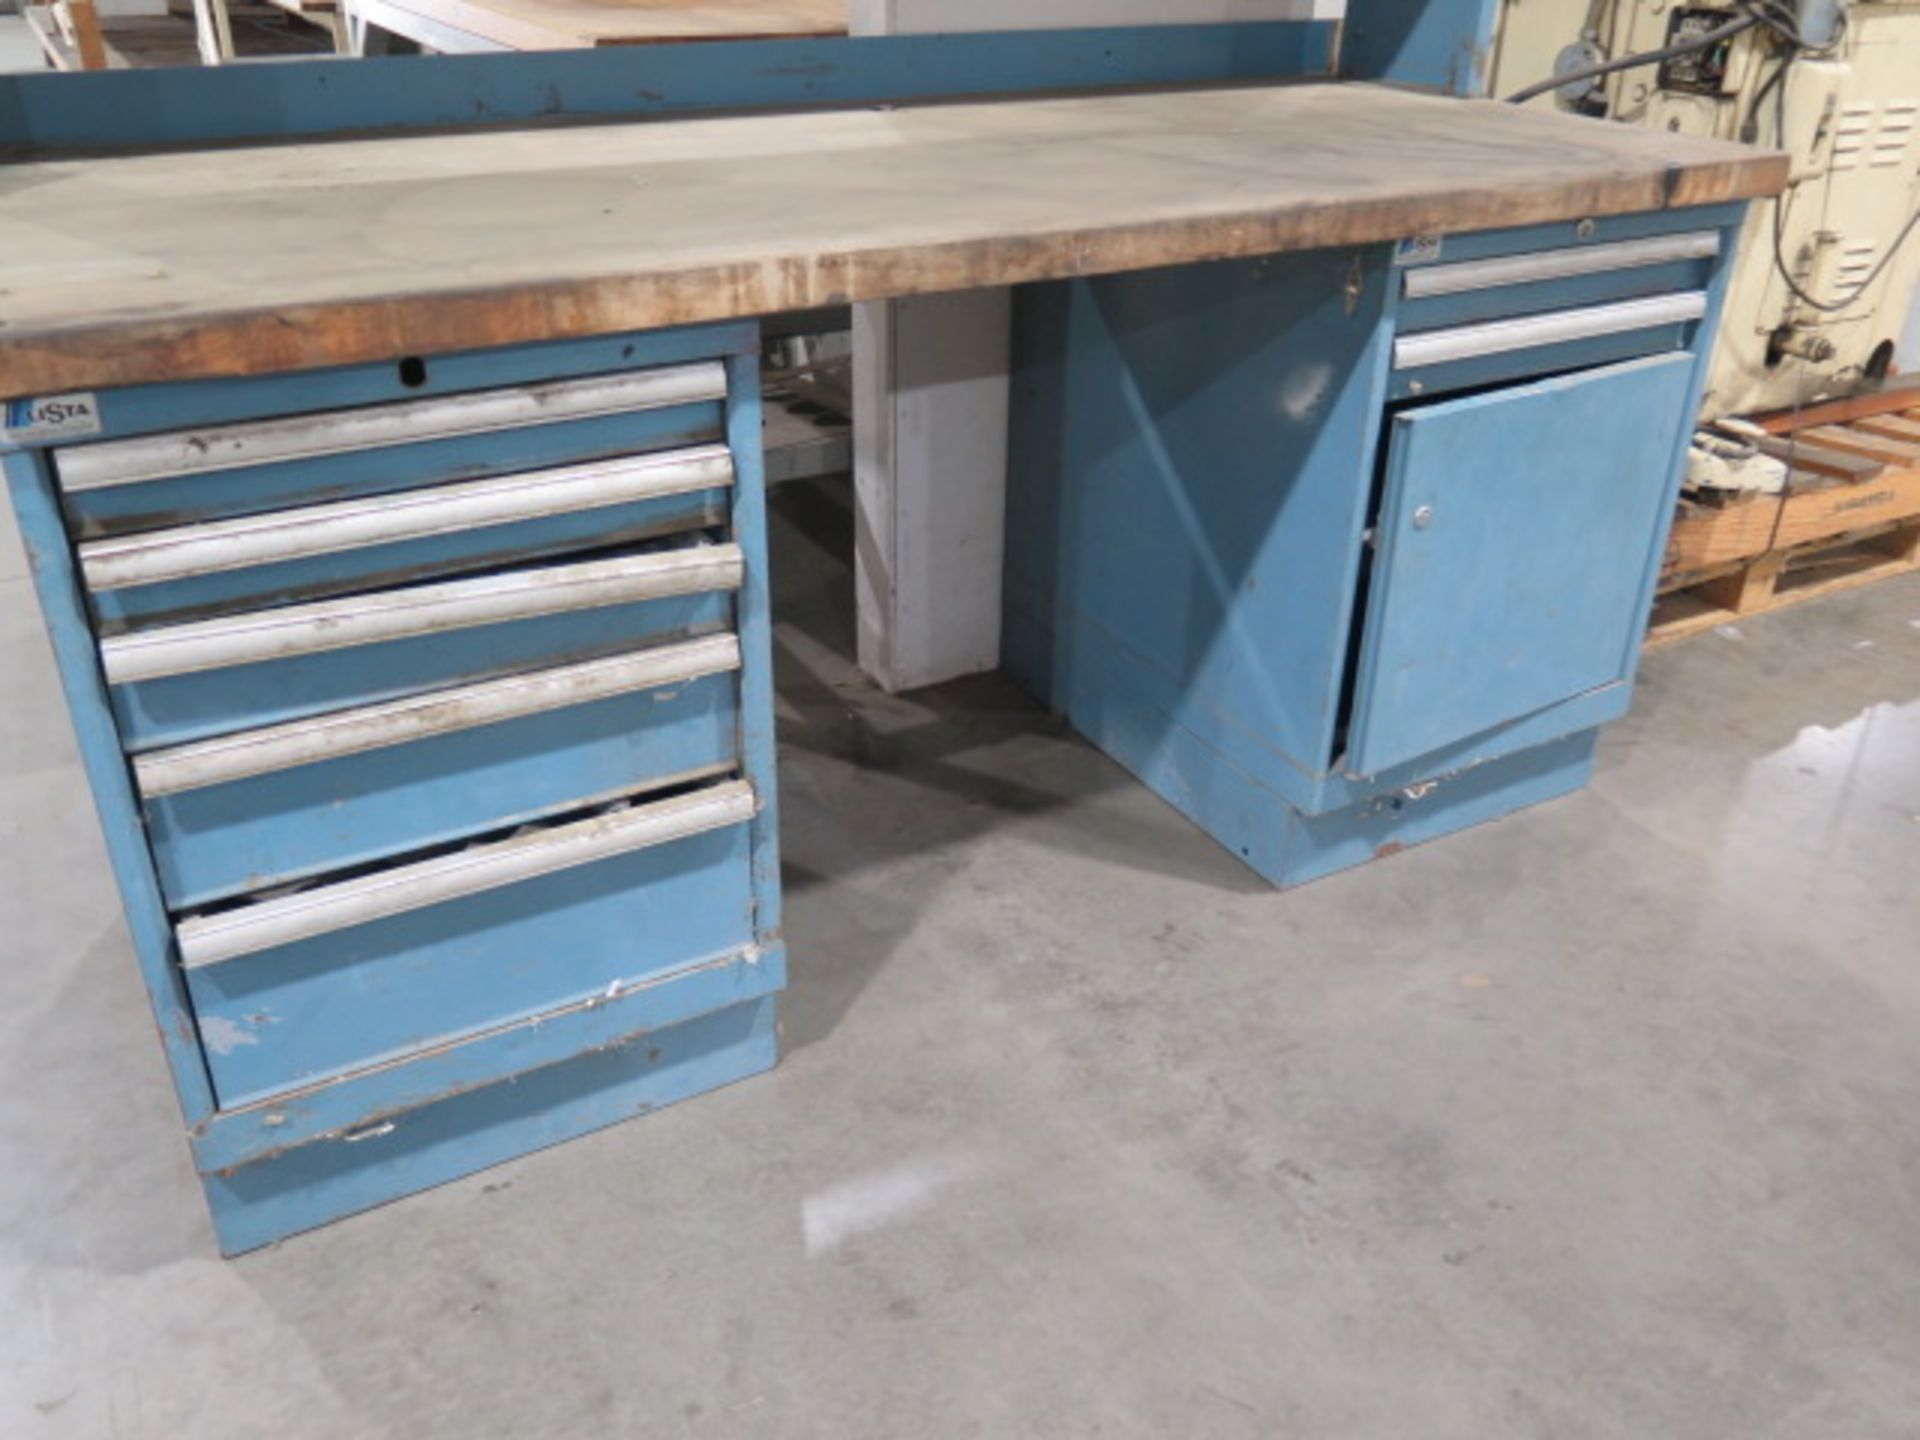 Lista 7-Drawer Maple-Top Work Bench and 36” x 60” Maple-Top Work Bench - Image 2 of 4